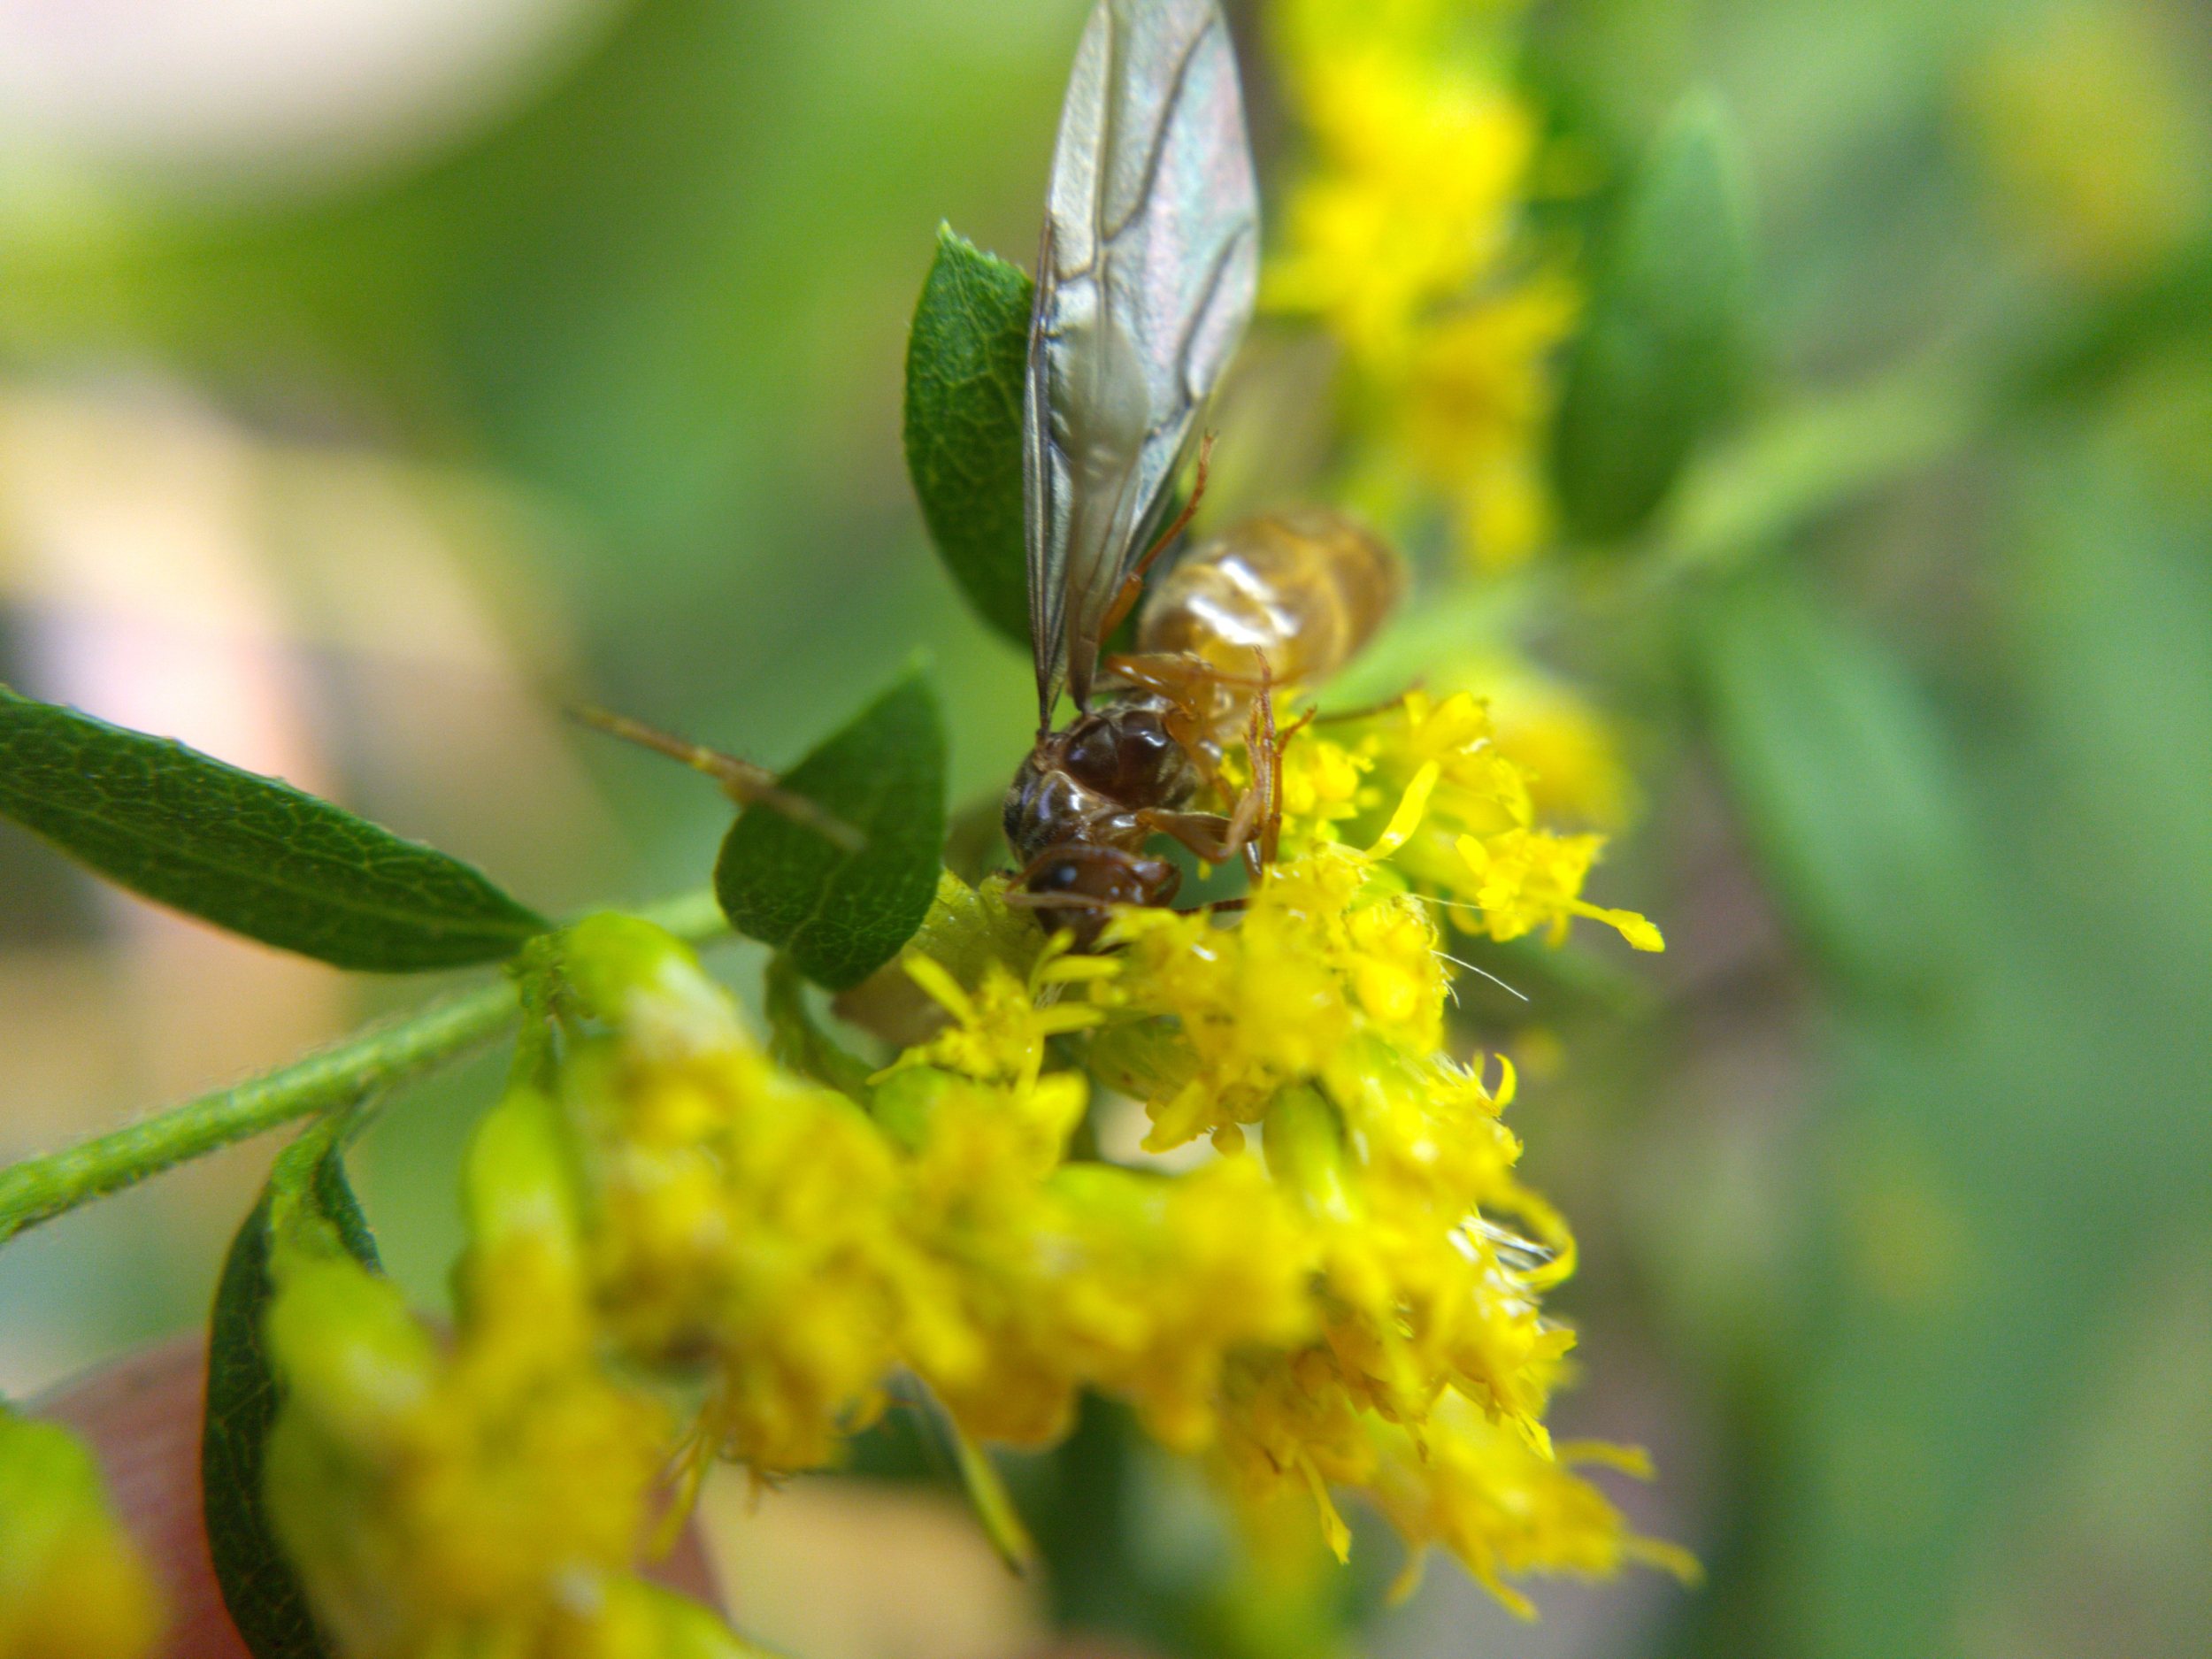 A golden-brown ant alate, dead, on yellow goldenrod flowers. There's a leg poking out behind it if you look closely.